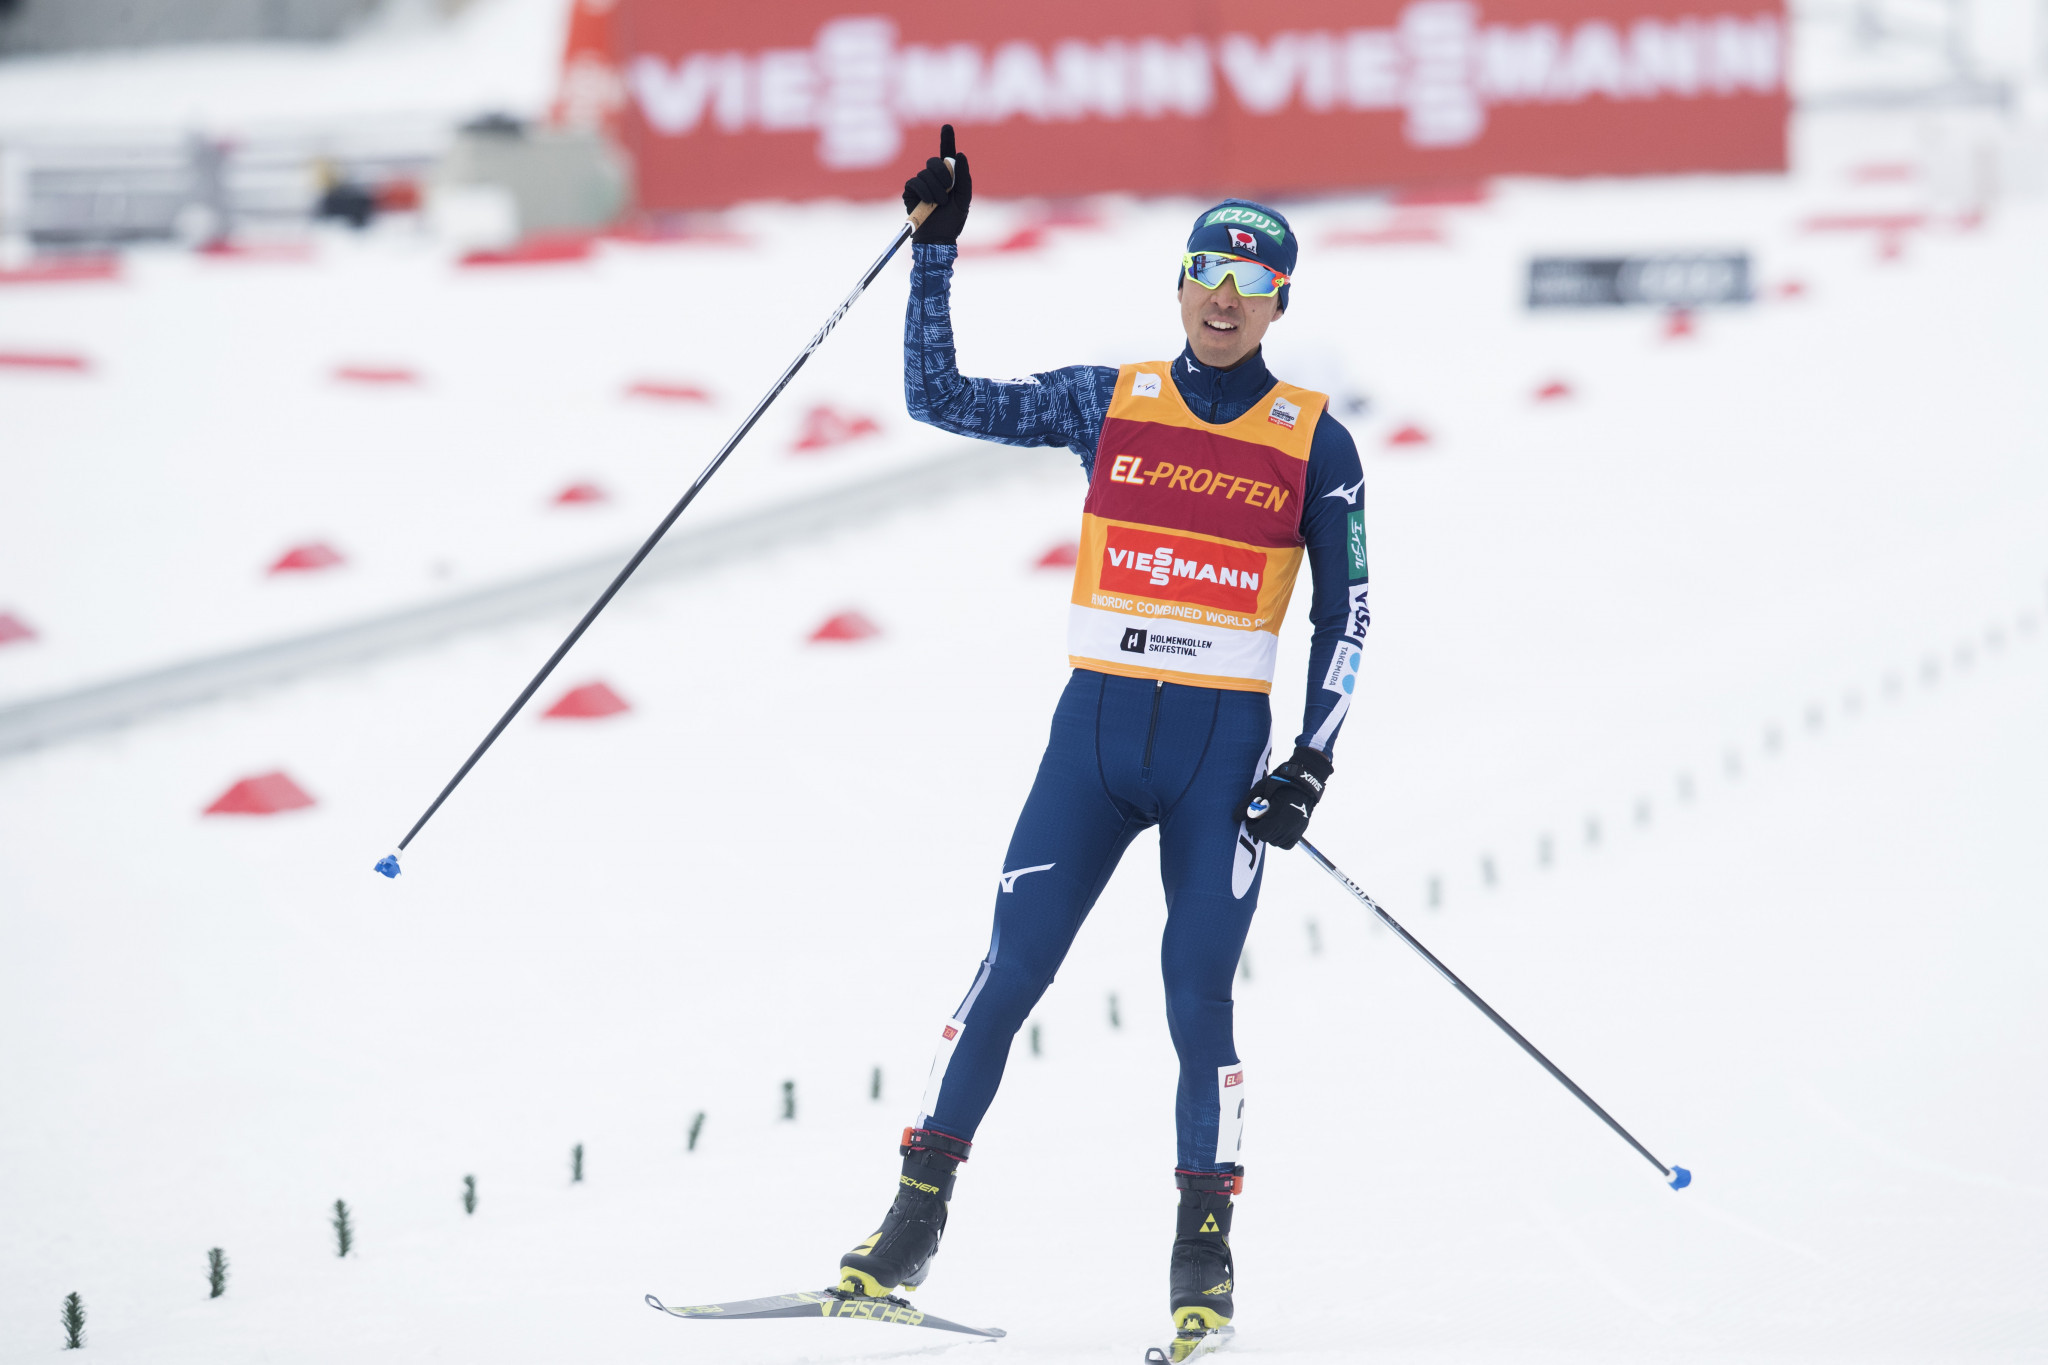 Third place in Klingenthal today earned Japan's Akito Watabe the overall FIS Nordic Combined World Cup title ©Getty Images